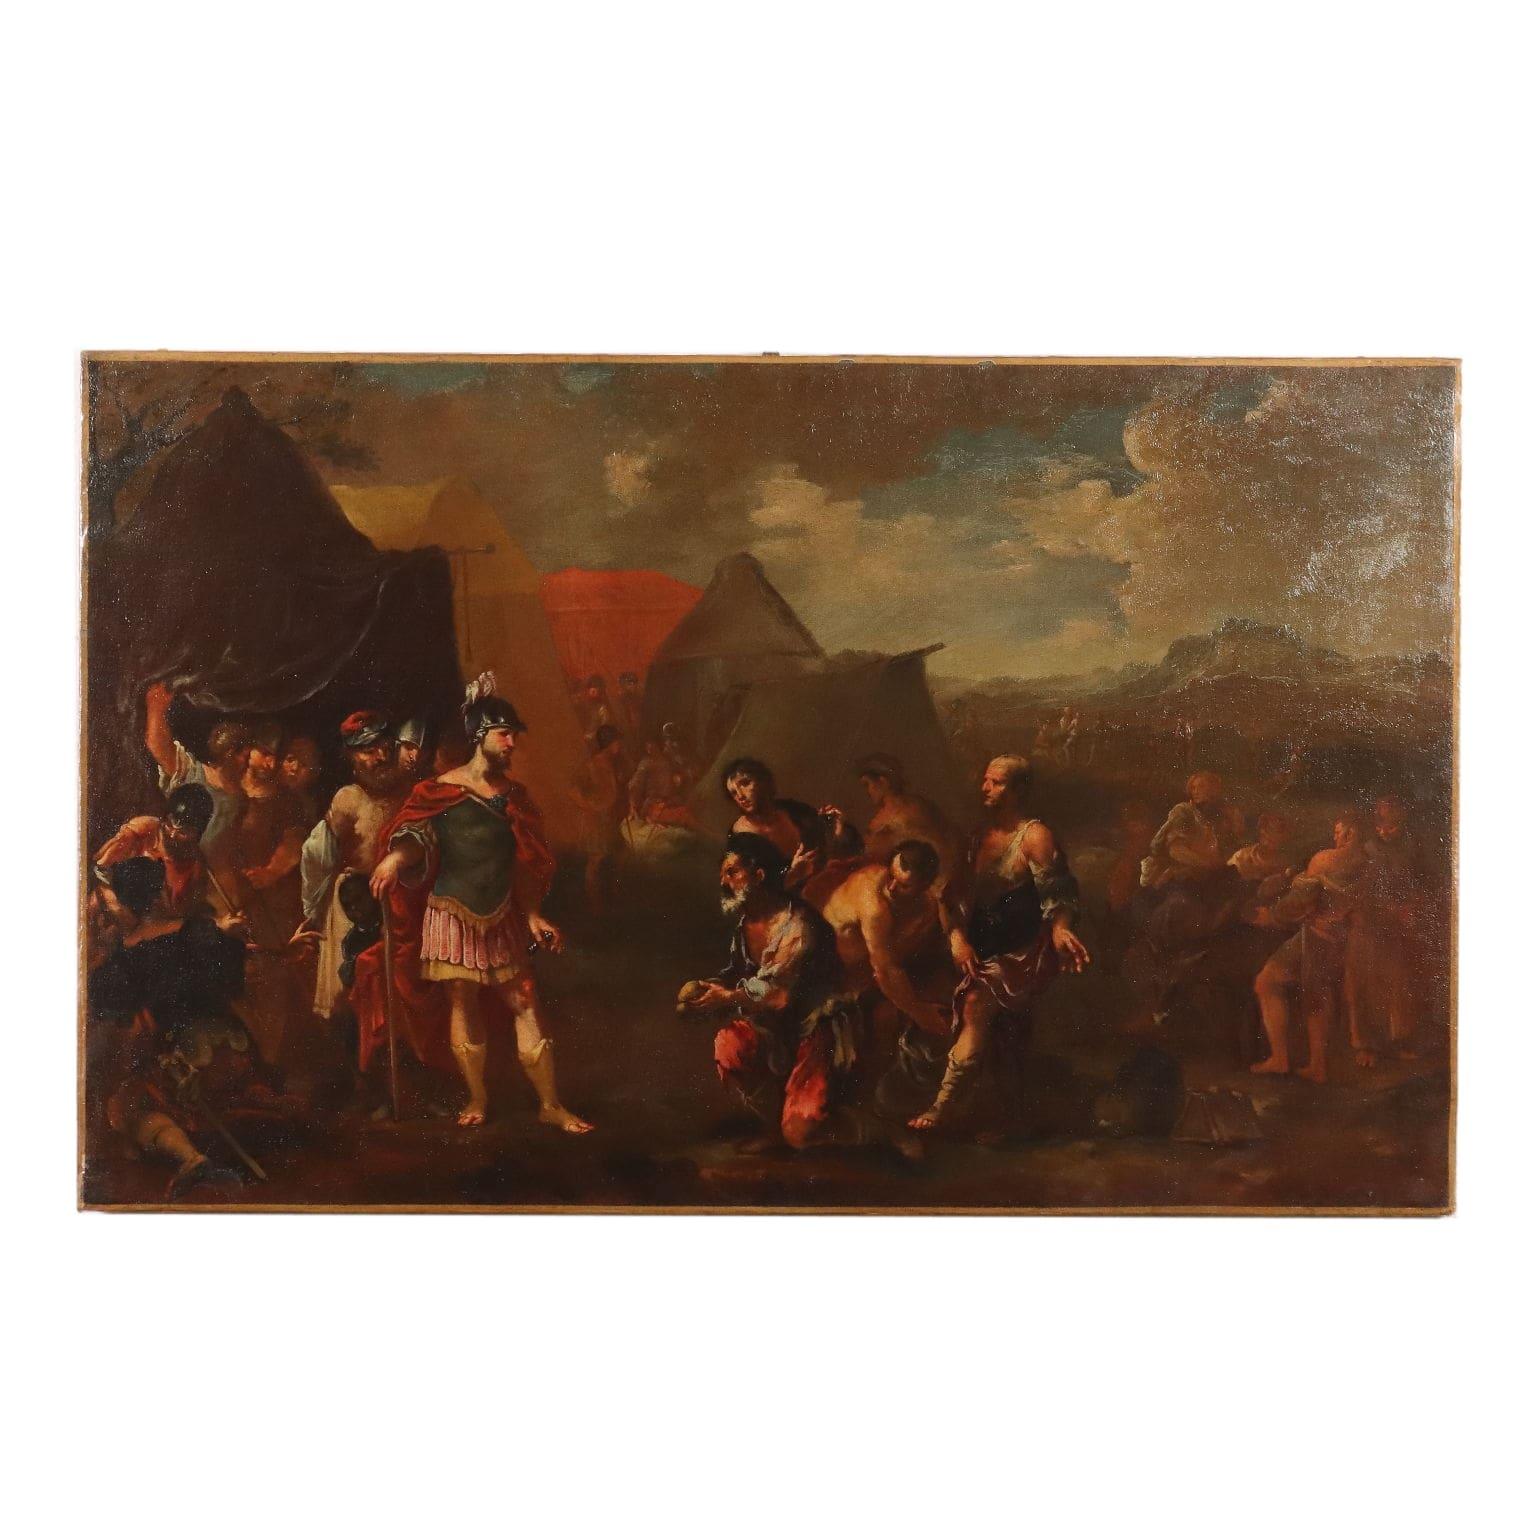 Unknown Figurative Painting - Painting with Historical Subject 17th-18th Century